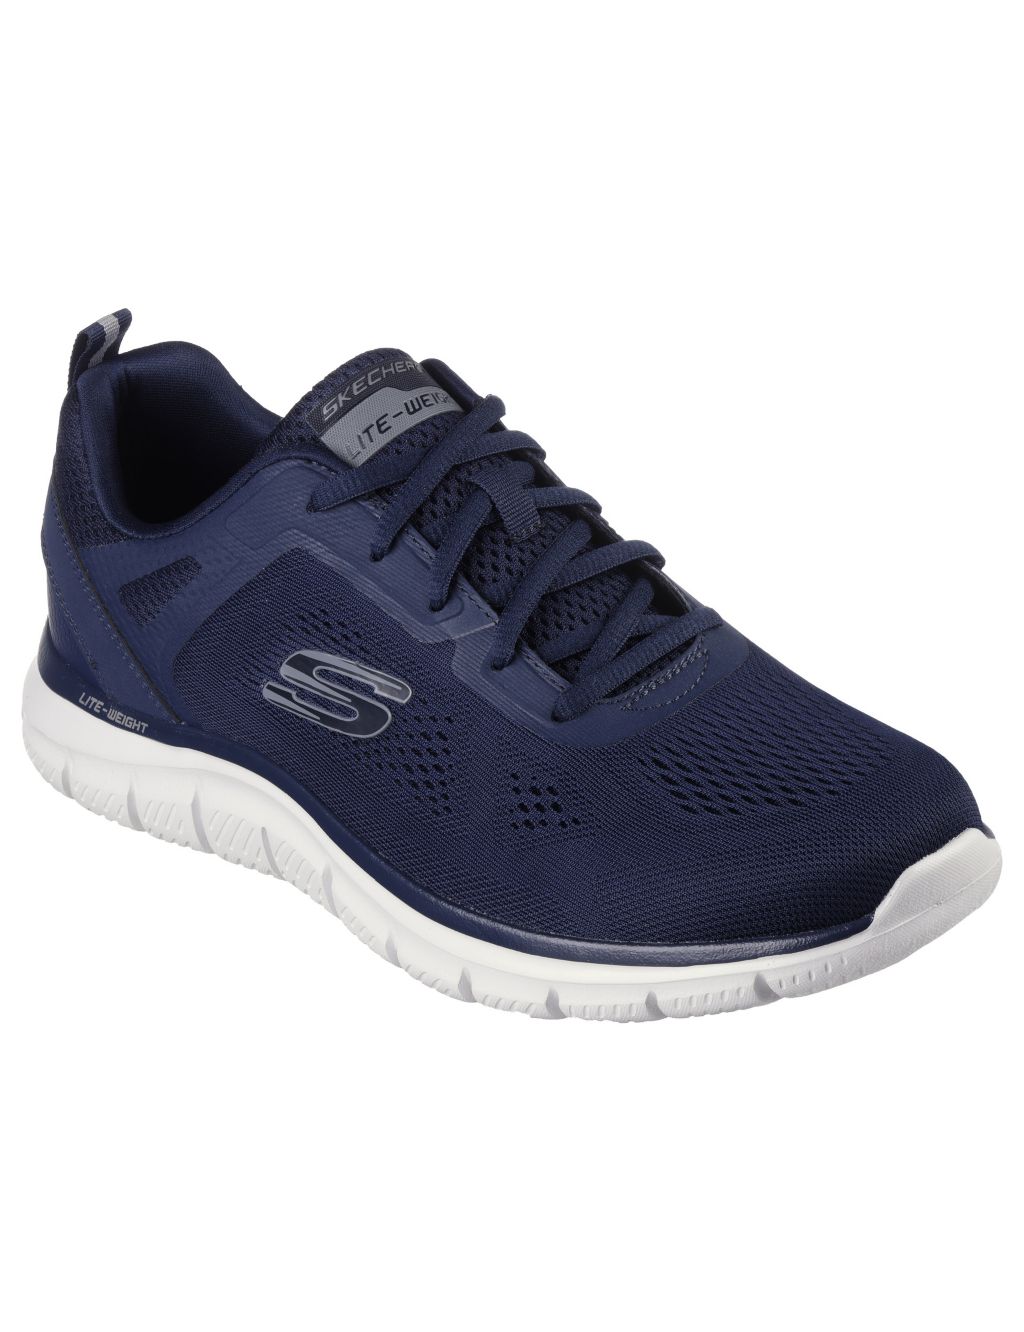 Track Broader Lace Up Trainers image 2